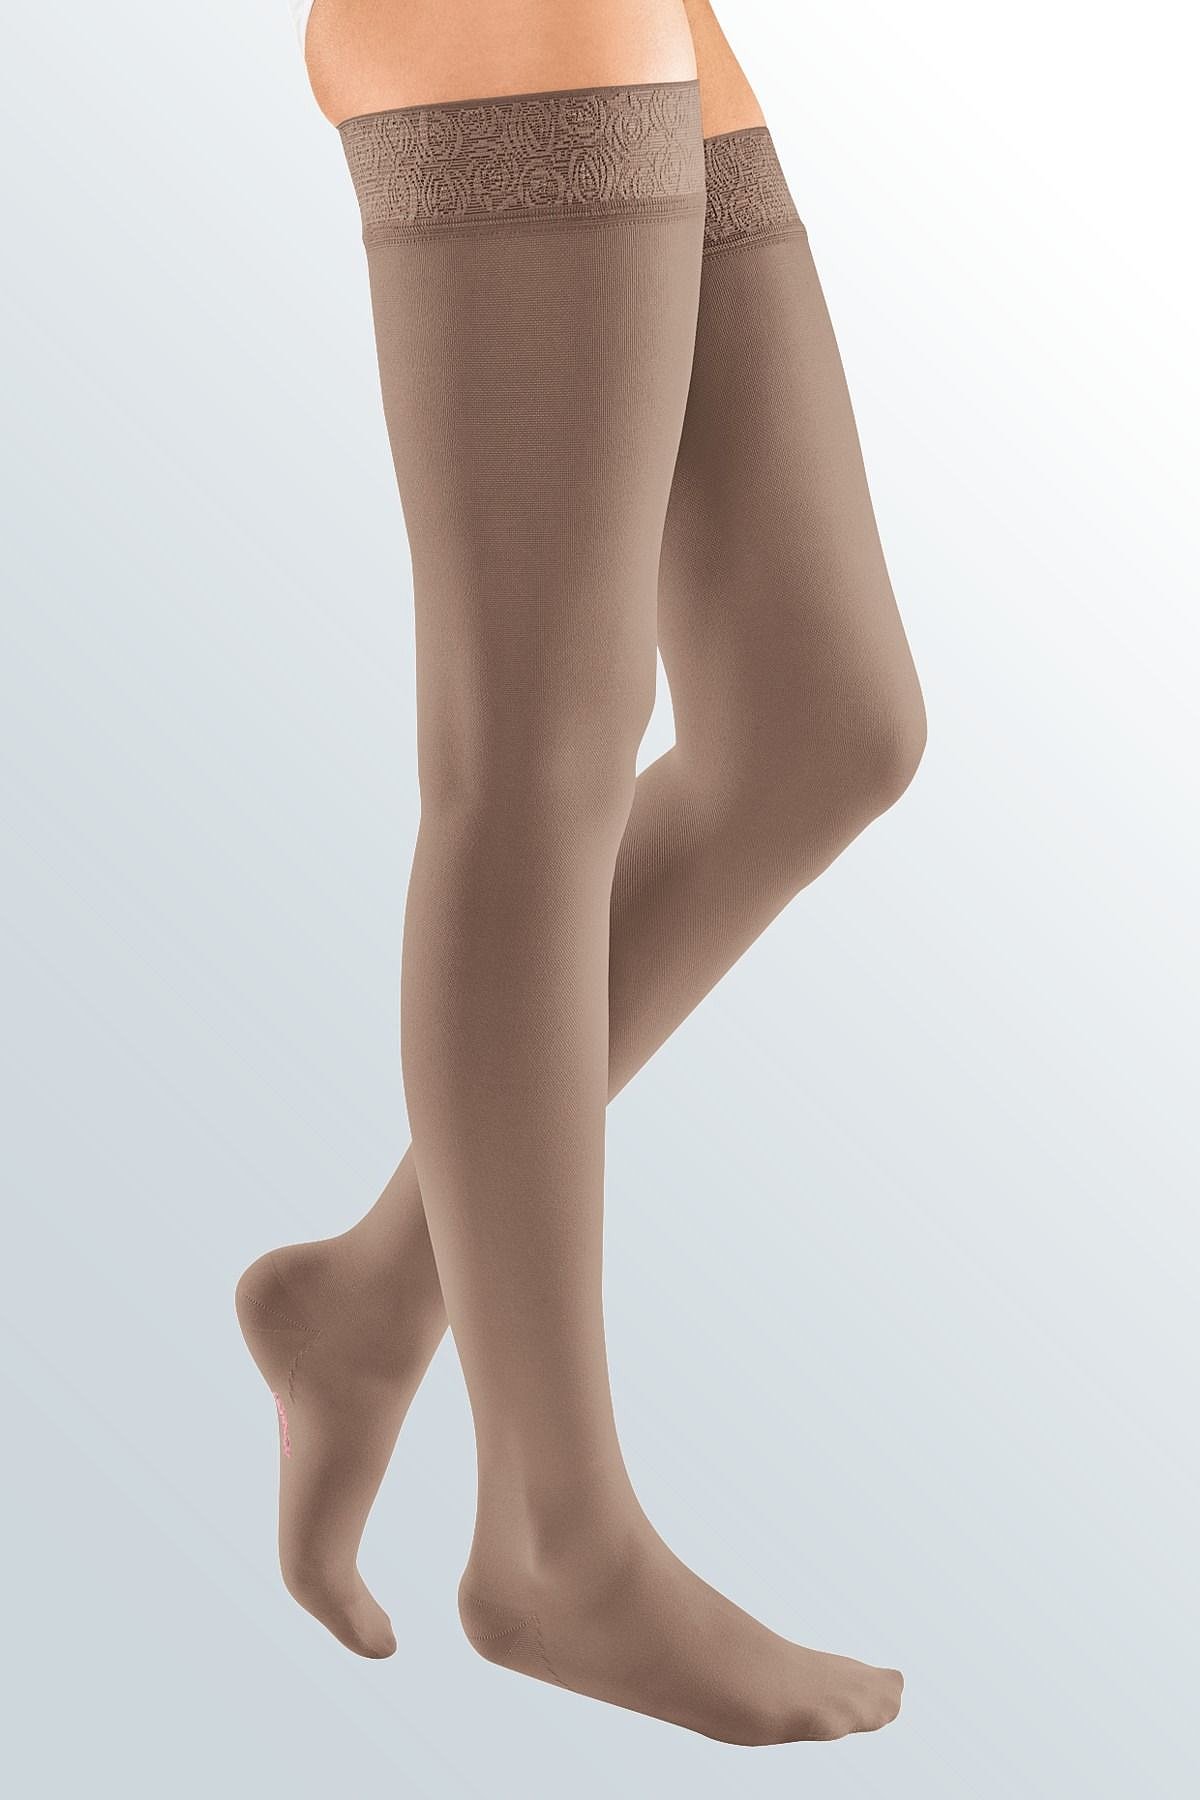 Get Compression Stockings Professionally Fitted in Alaska